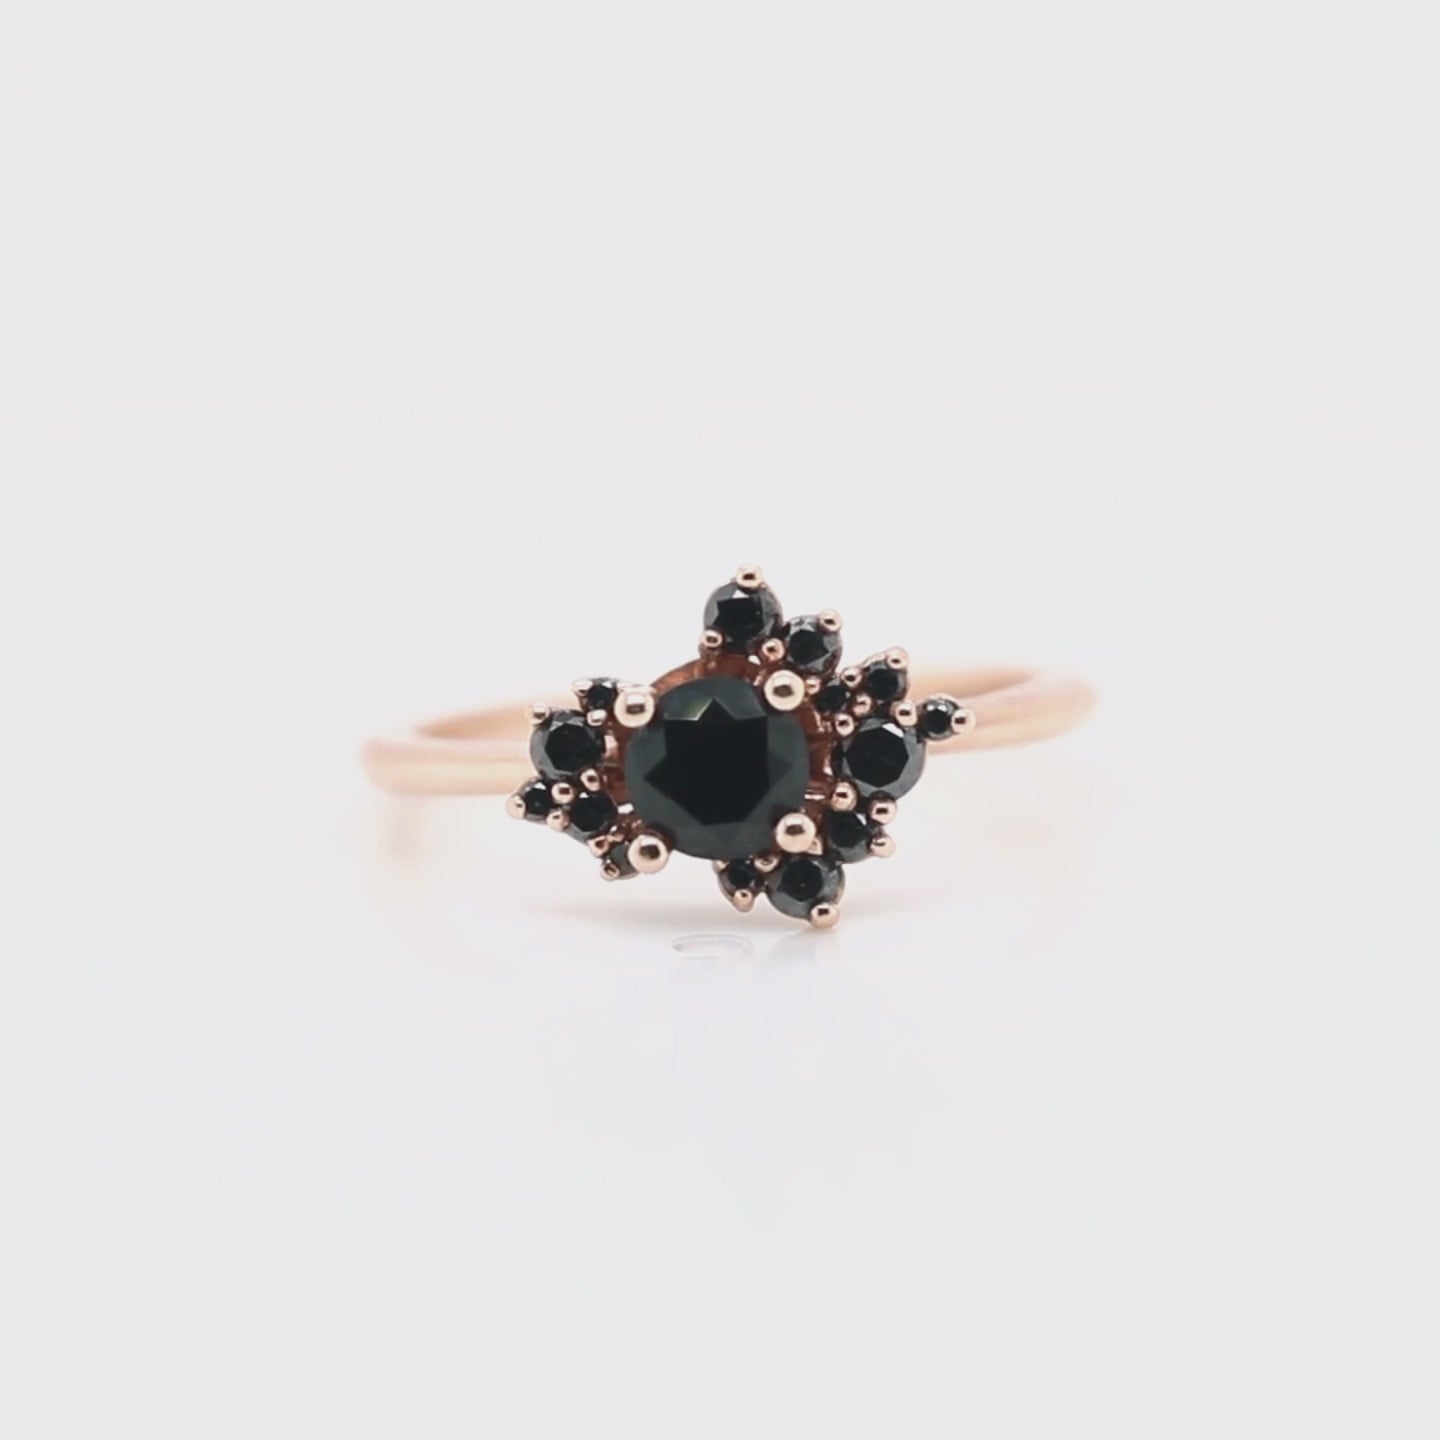 Orion Ring with All Black Diamonds - Cluster ring - Made to Order, Choose Your Gold Tone